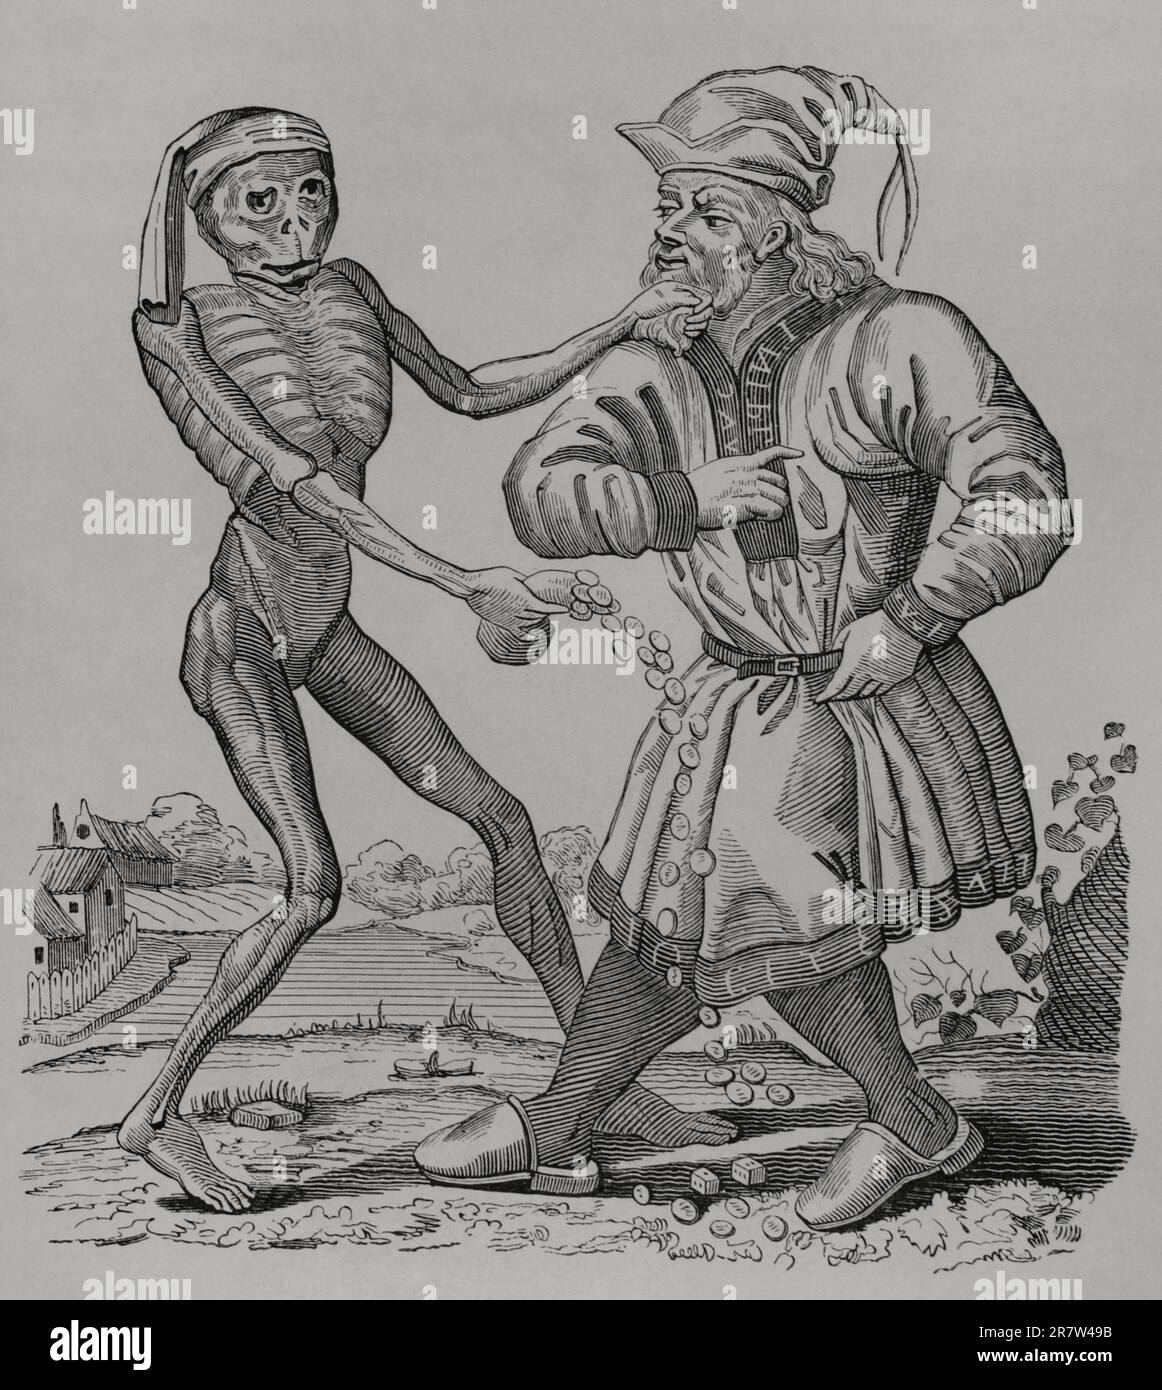 The Jew and Death. Episode from the Dance of Death, painted in 1441 in the Dominican cemetery in Basel. Engraving from an original by Matthäus Merian in 1641. 'Les Arts au Moyen Age et a l'Epoque de la Renaissance', by Paul Lacroix. Paris, 1877. Stock Photo